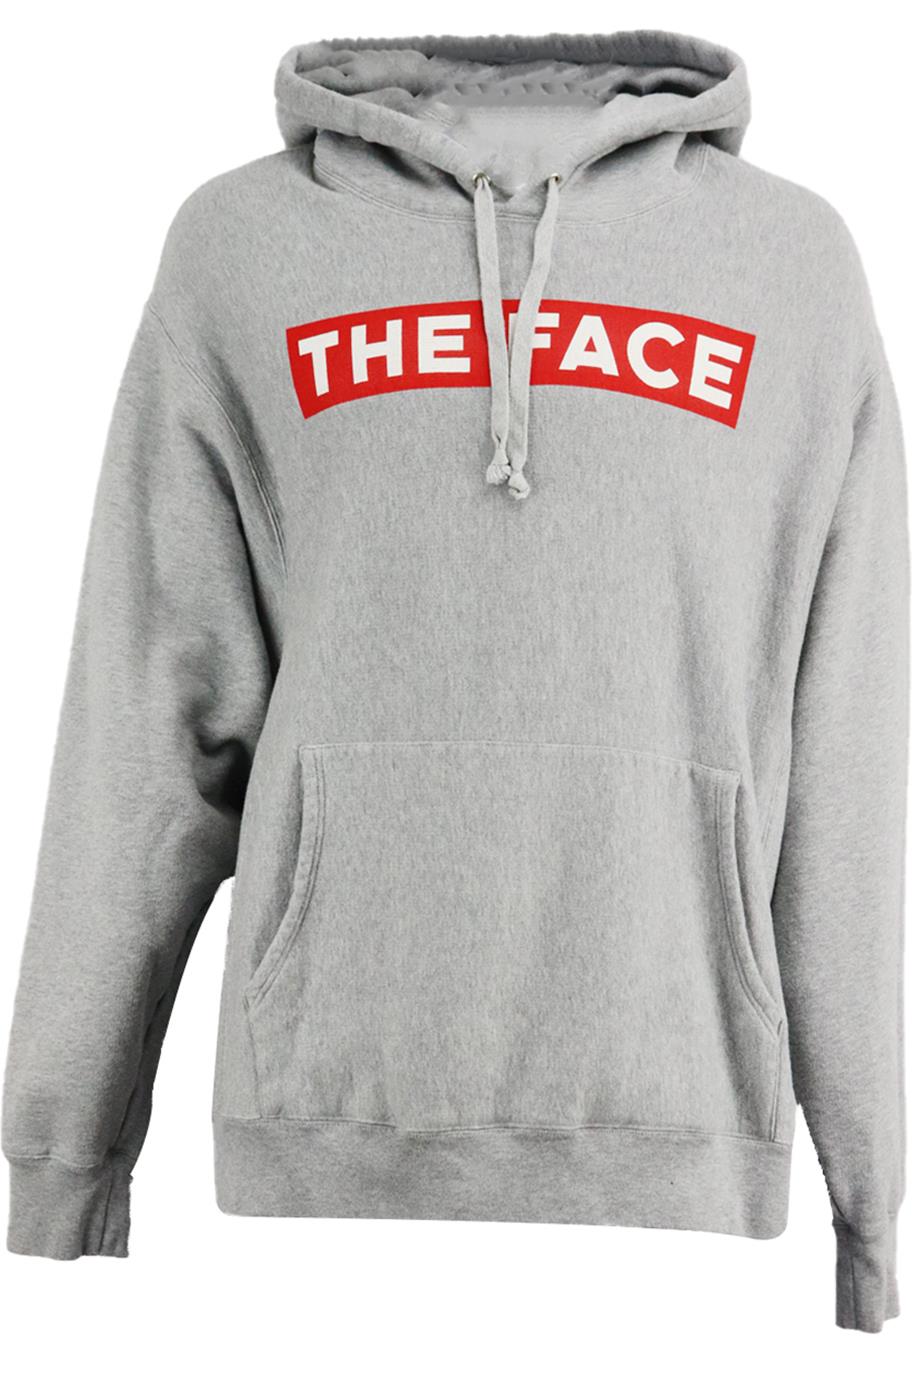 GUCCI + THE FACE MEN'S OVERSIZED PRINTED COTTON TERRY HOODIE XLARGE